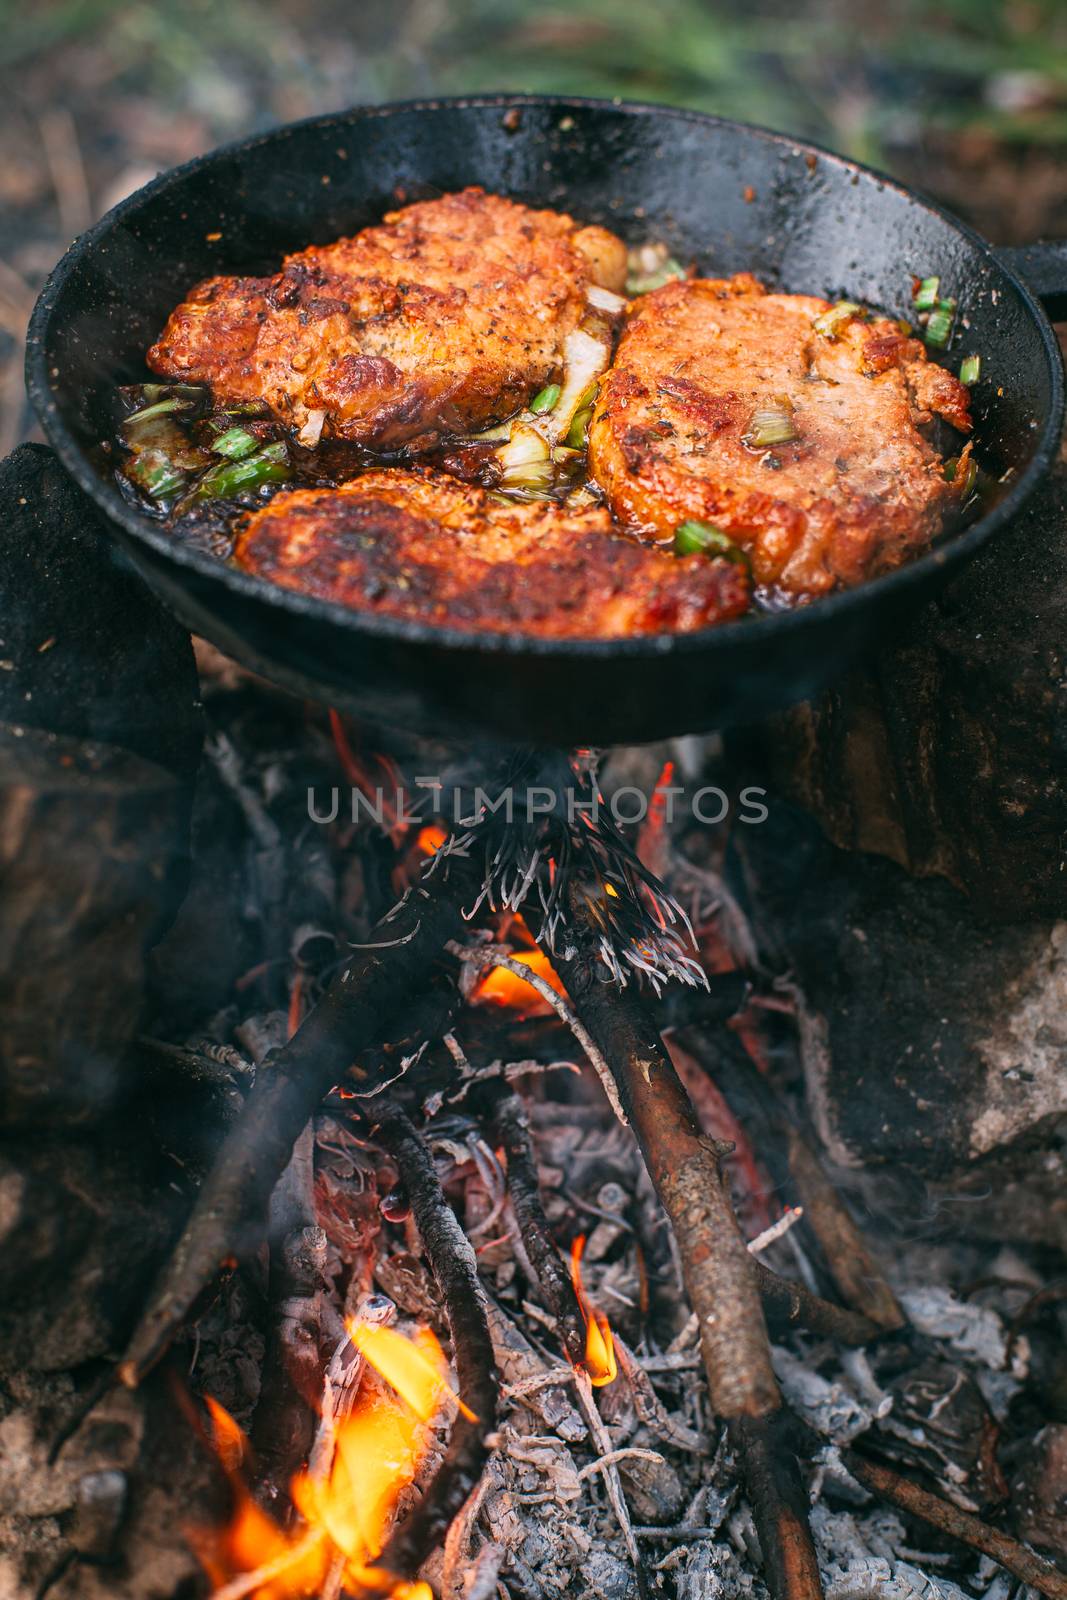 Frying meat in a pan over an open fire with leek. Steak in a pan by Opikanets